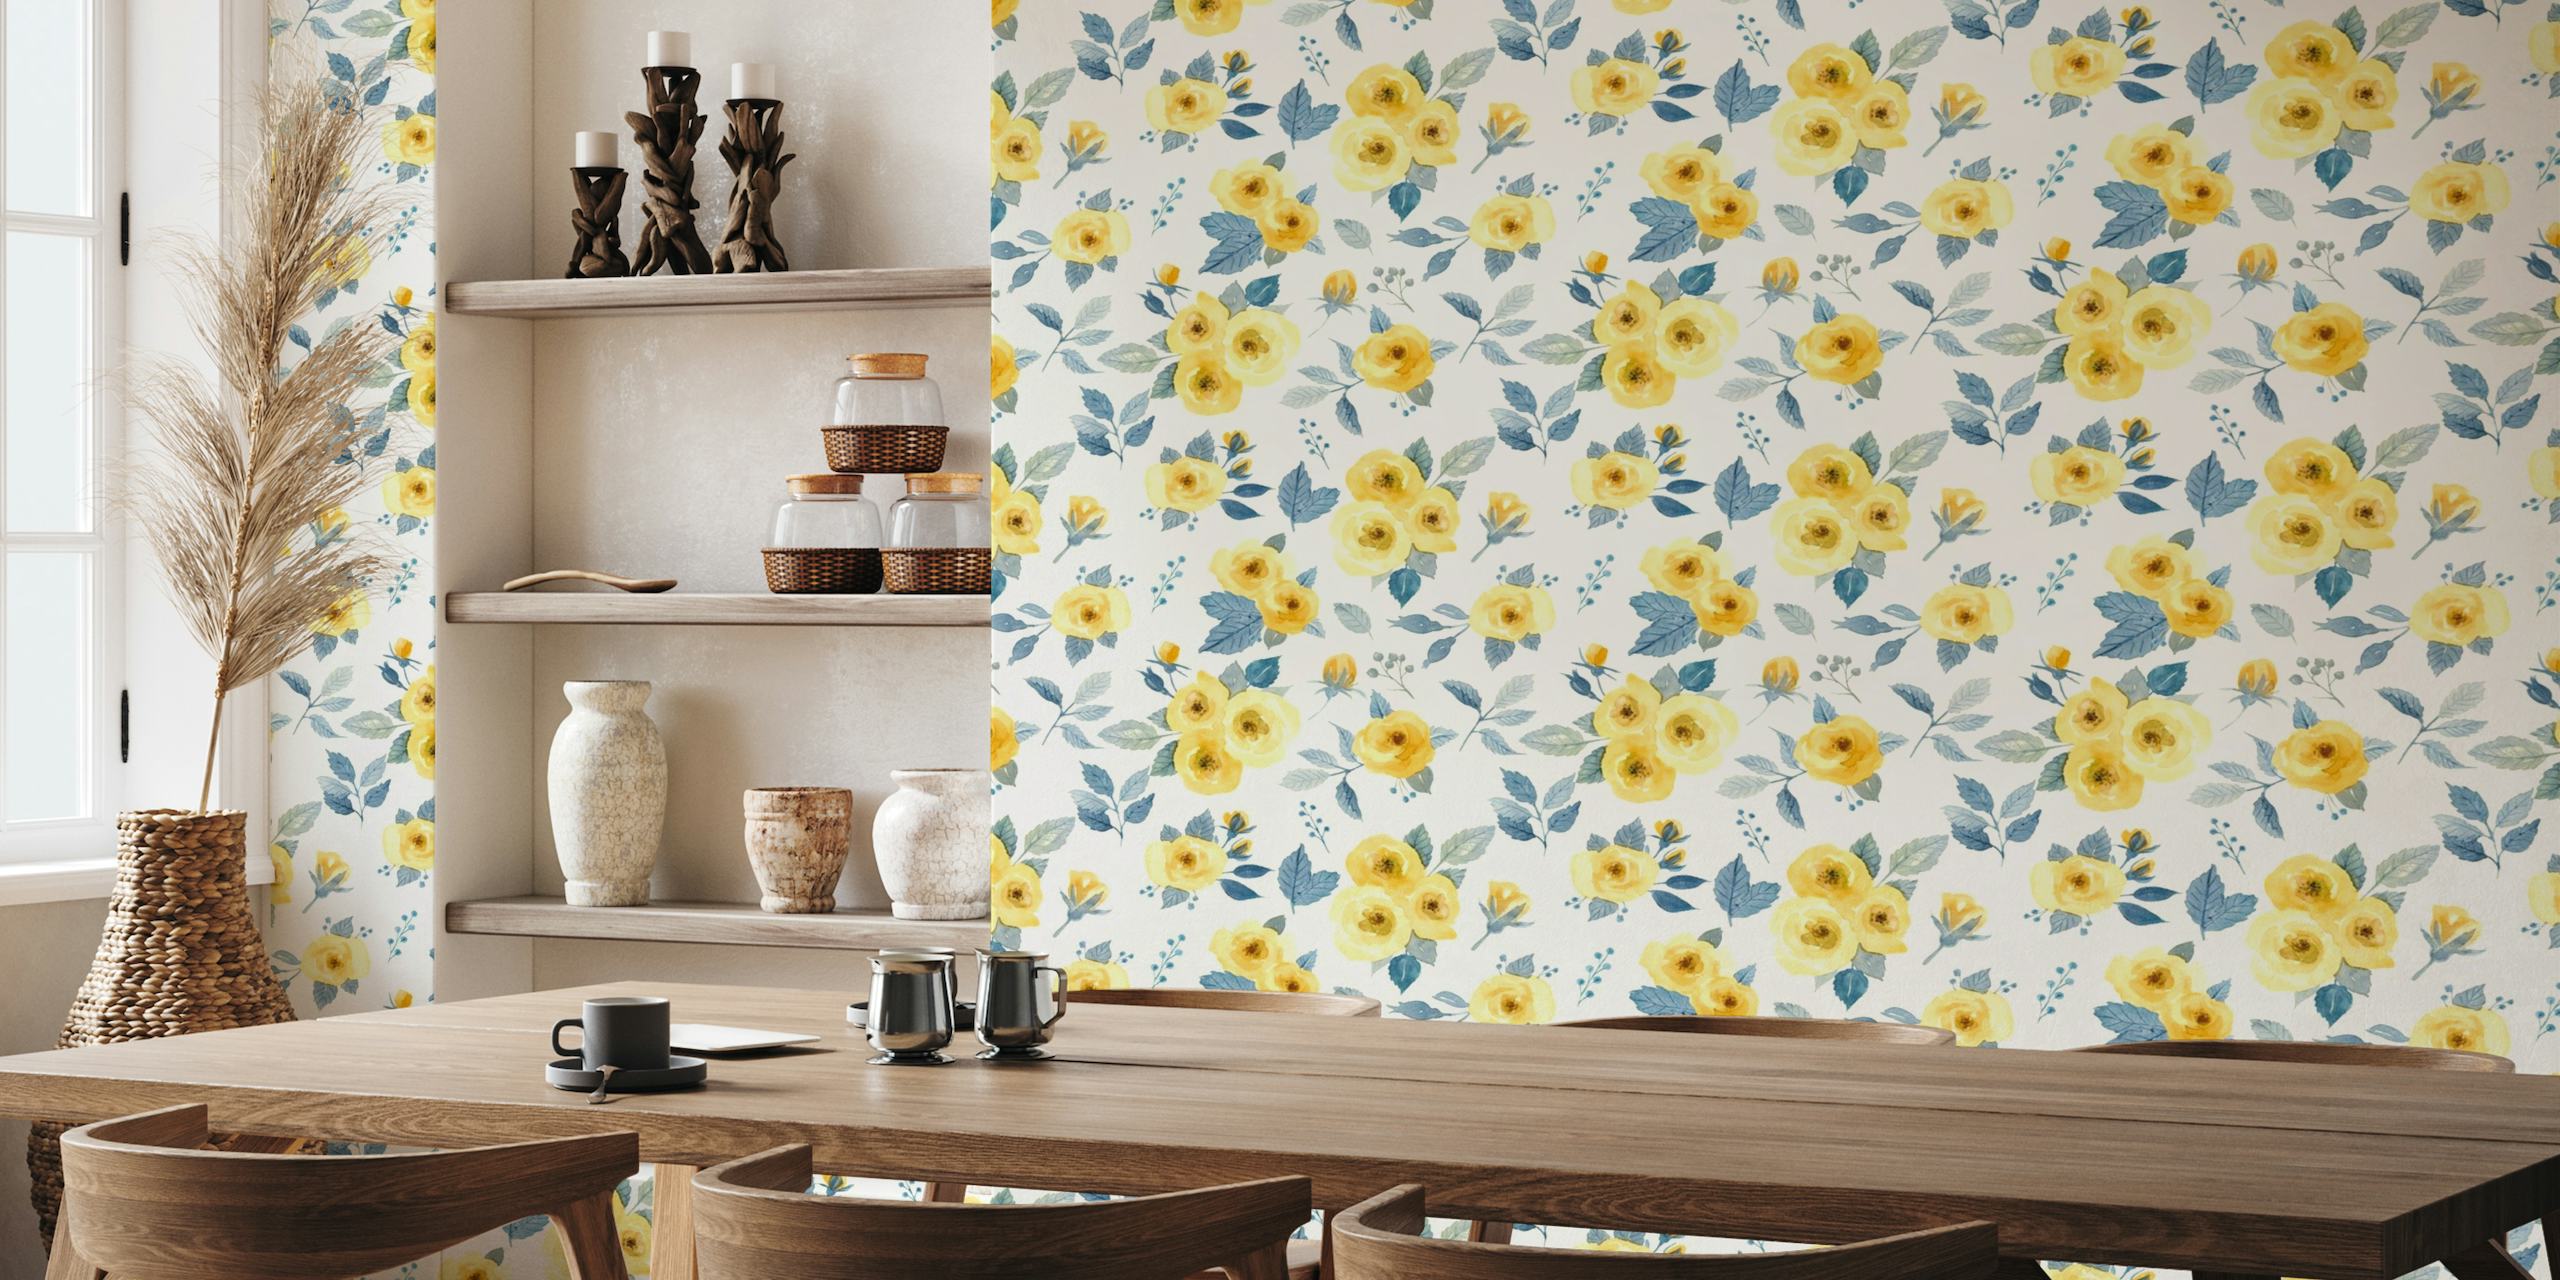 Loose watercolor roses pattern in yellow and dark blue on a wall mural